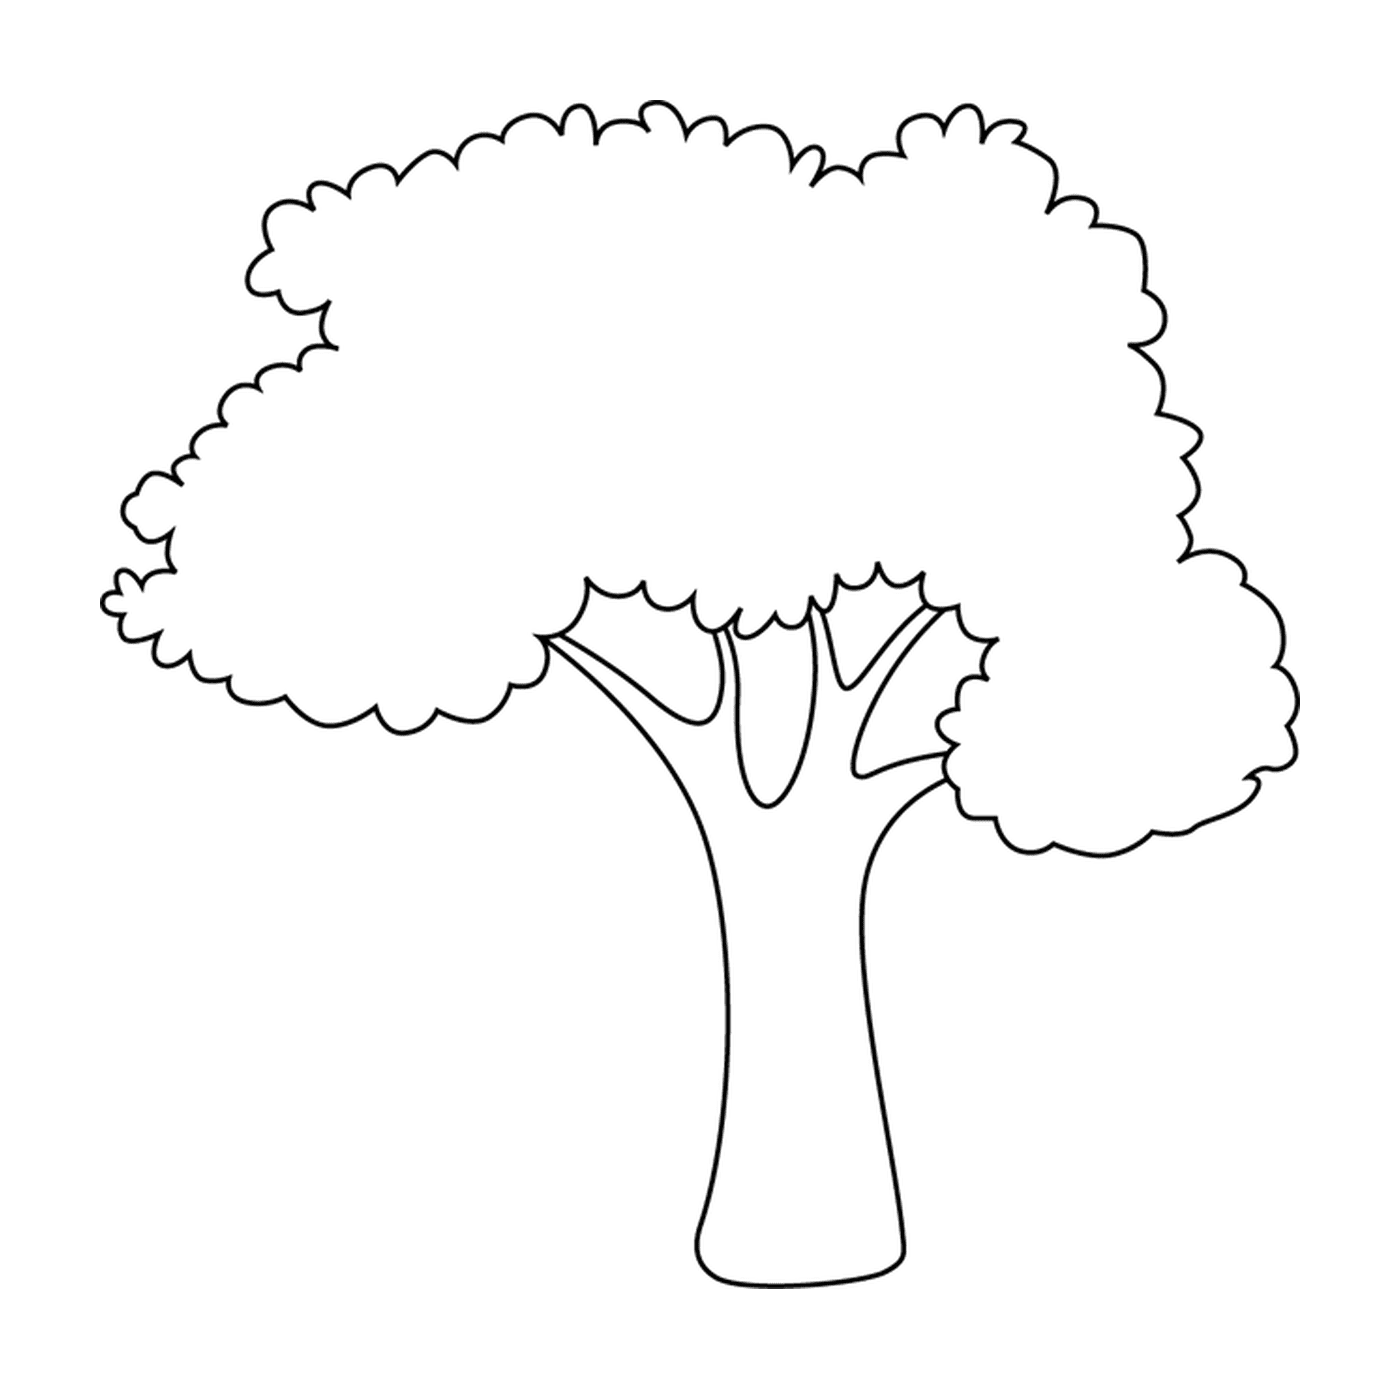  An easy and simple tree 